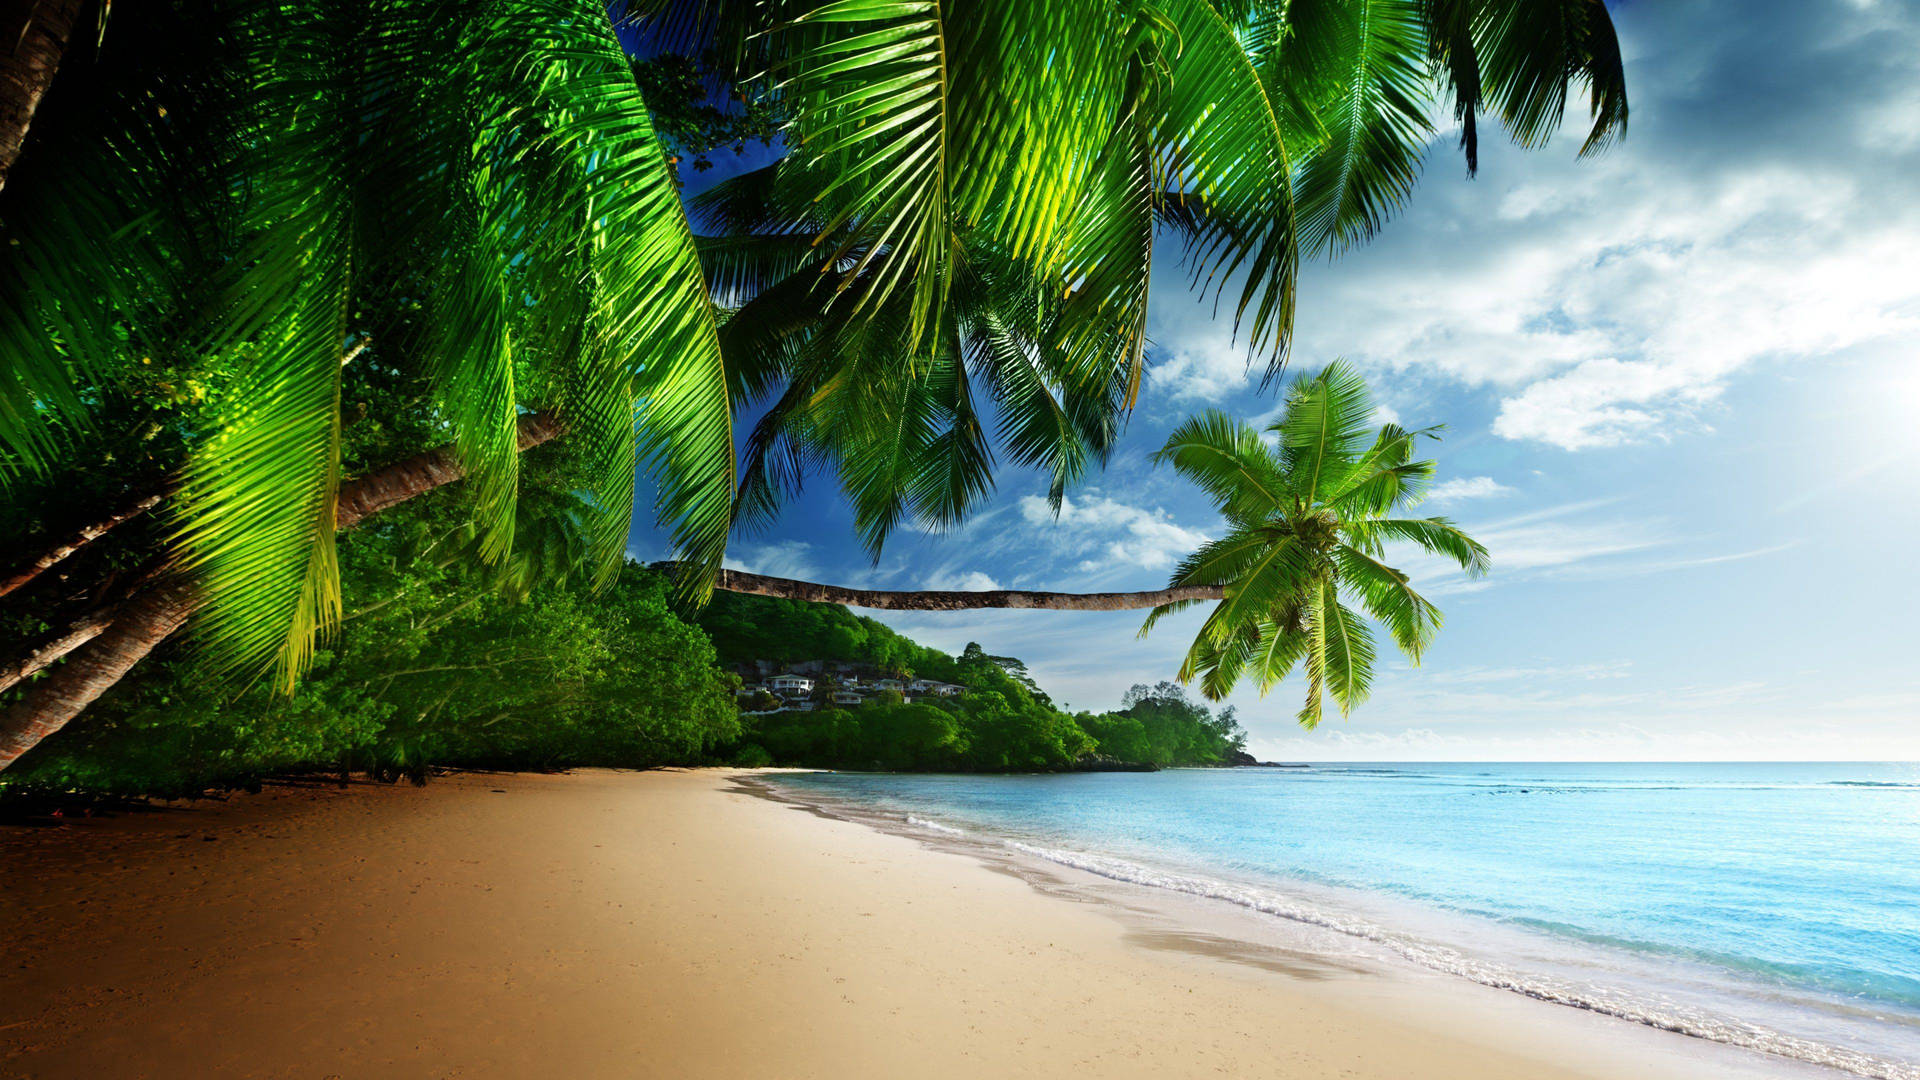 4k Beach With Trees Wallpaper